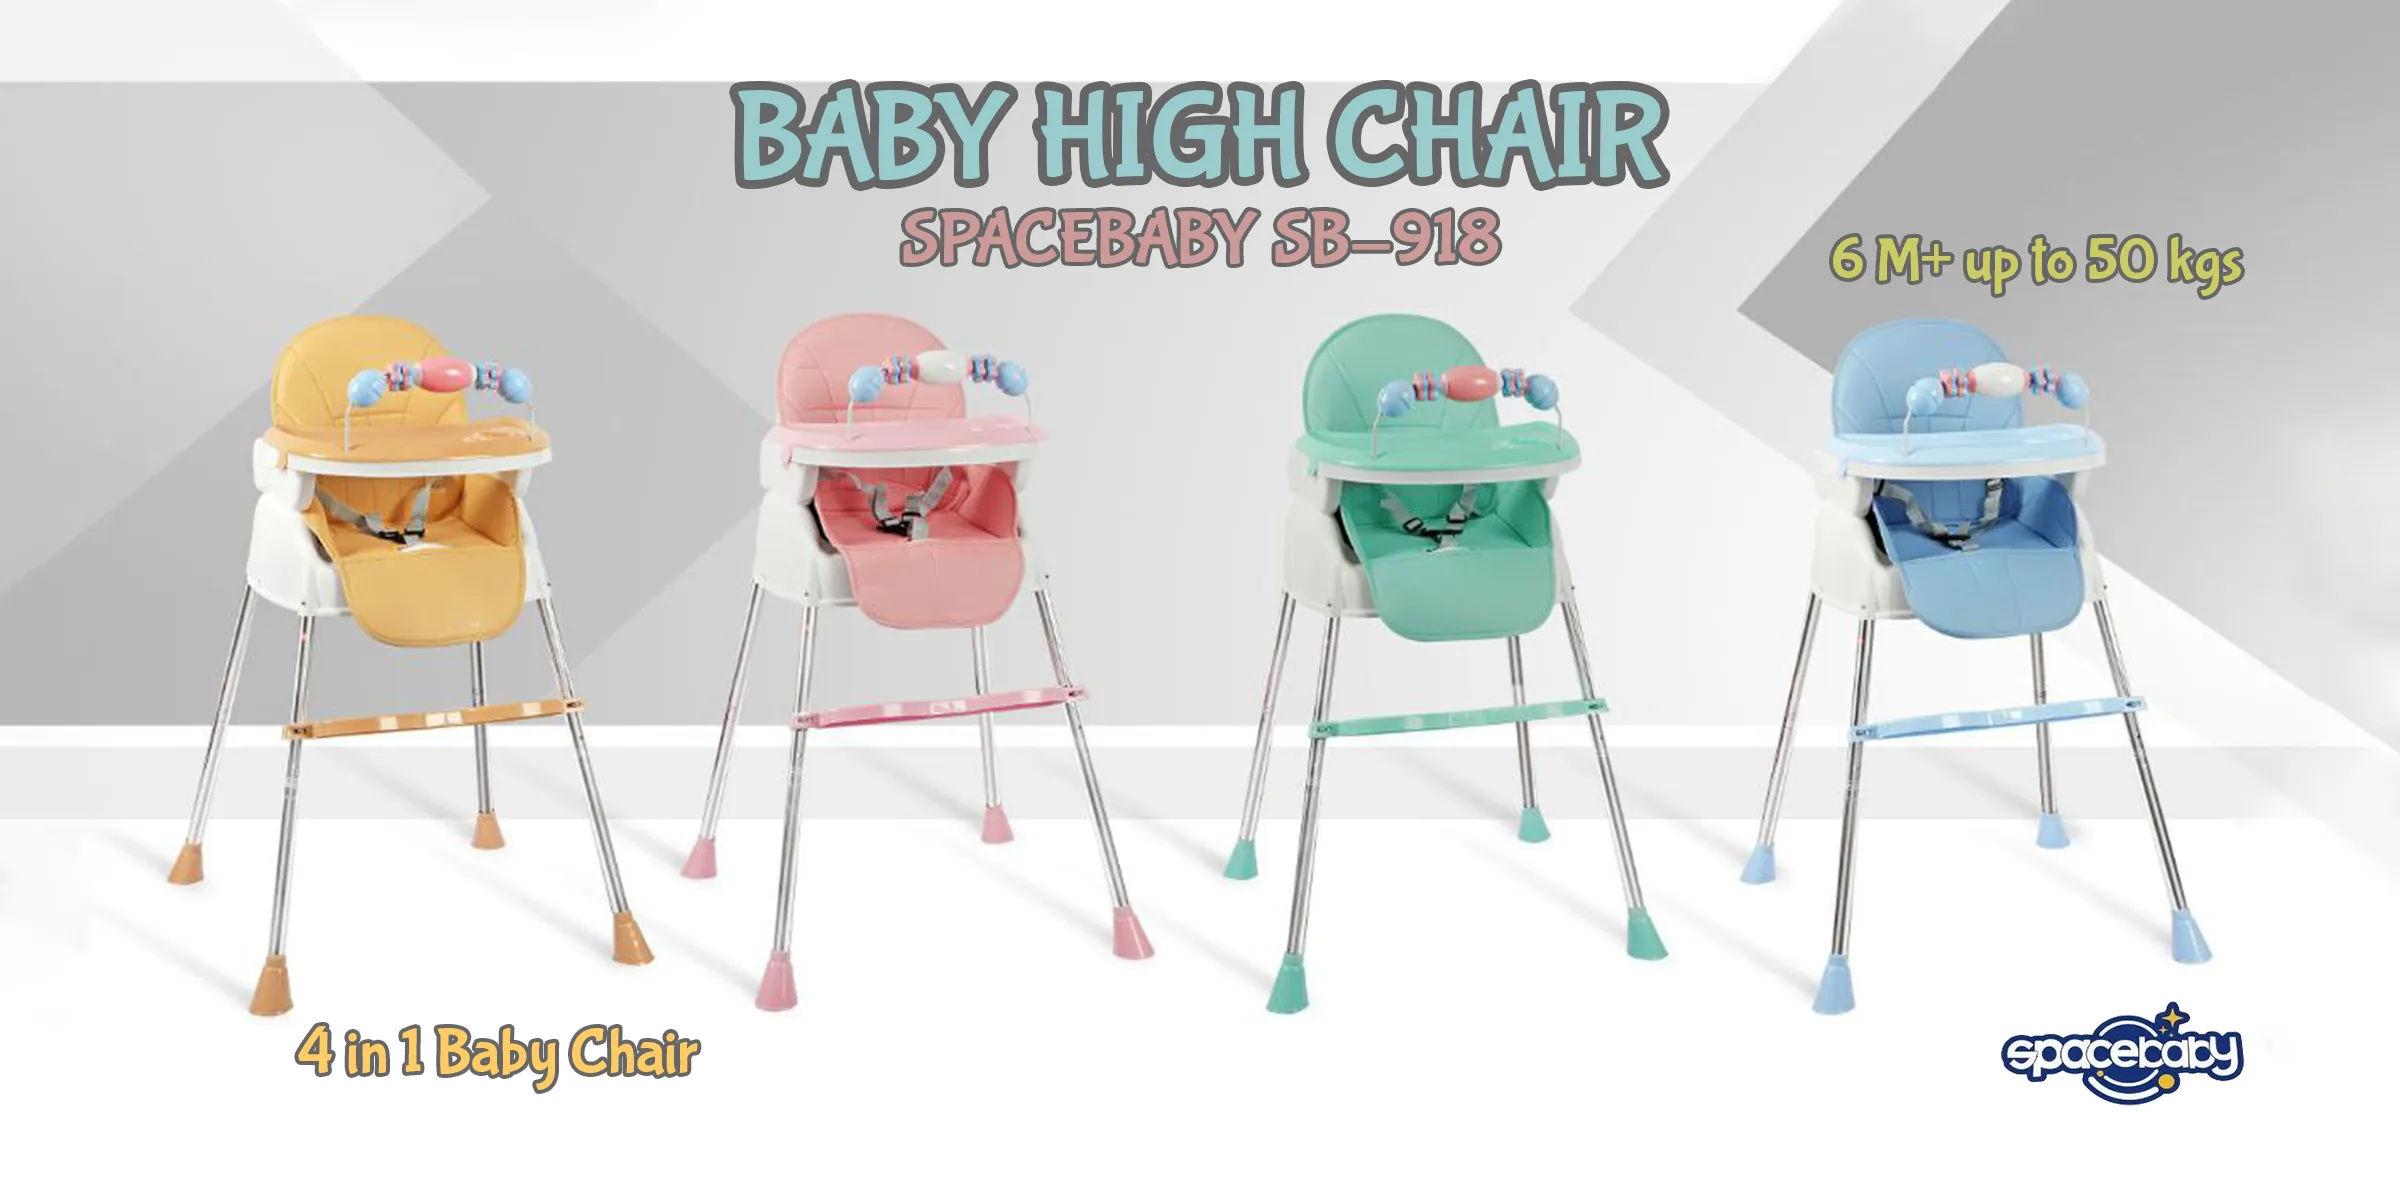 Baby Chair Spacebaby SB-918 COVER